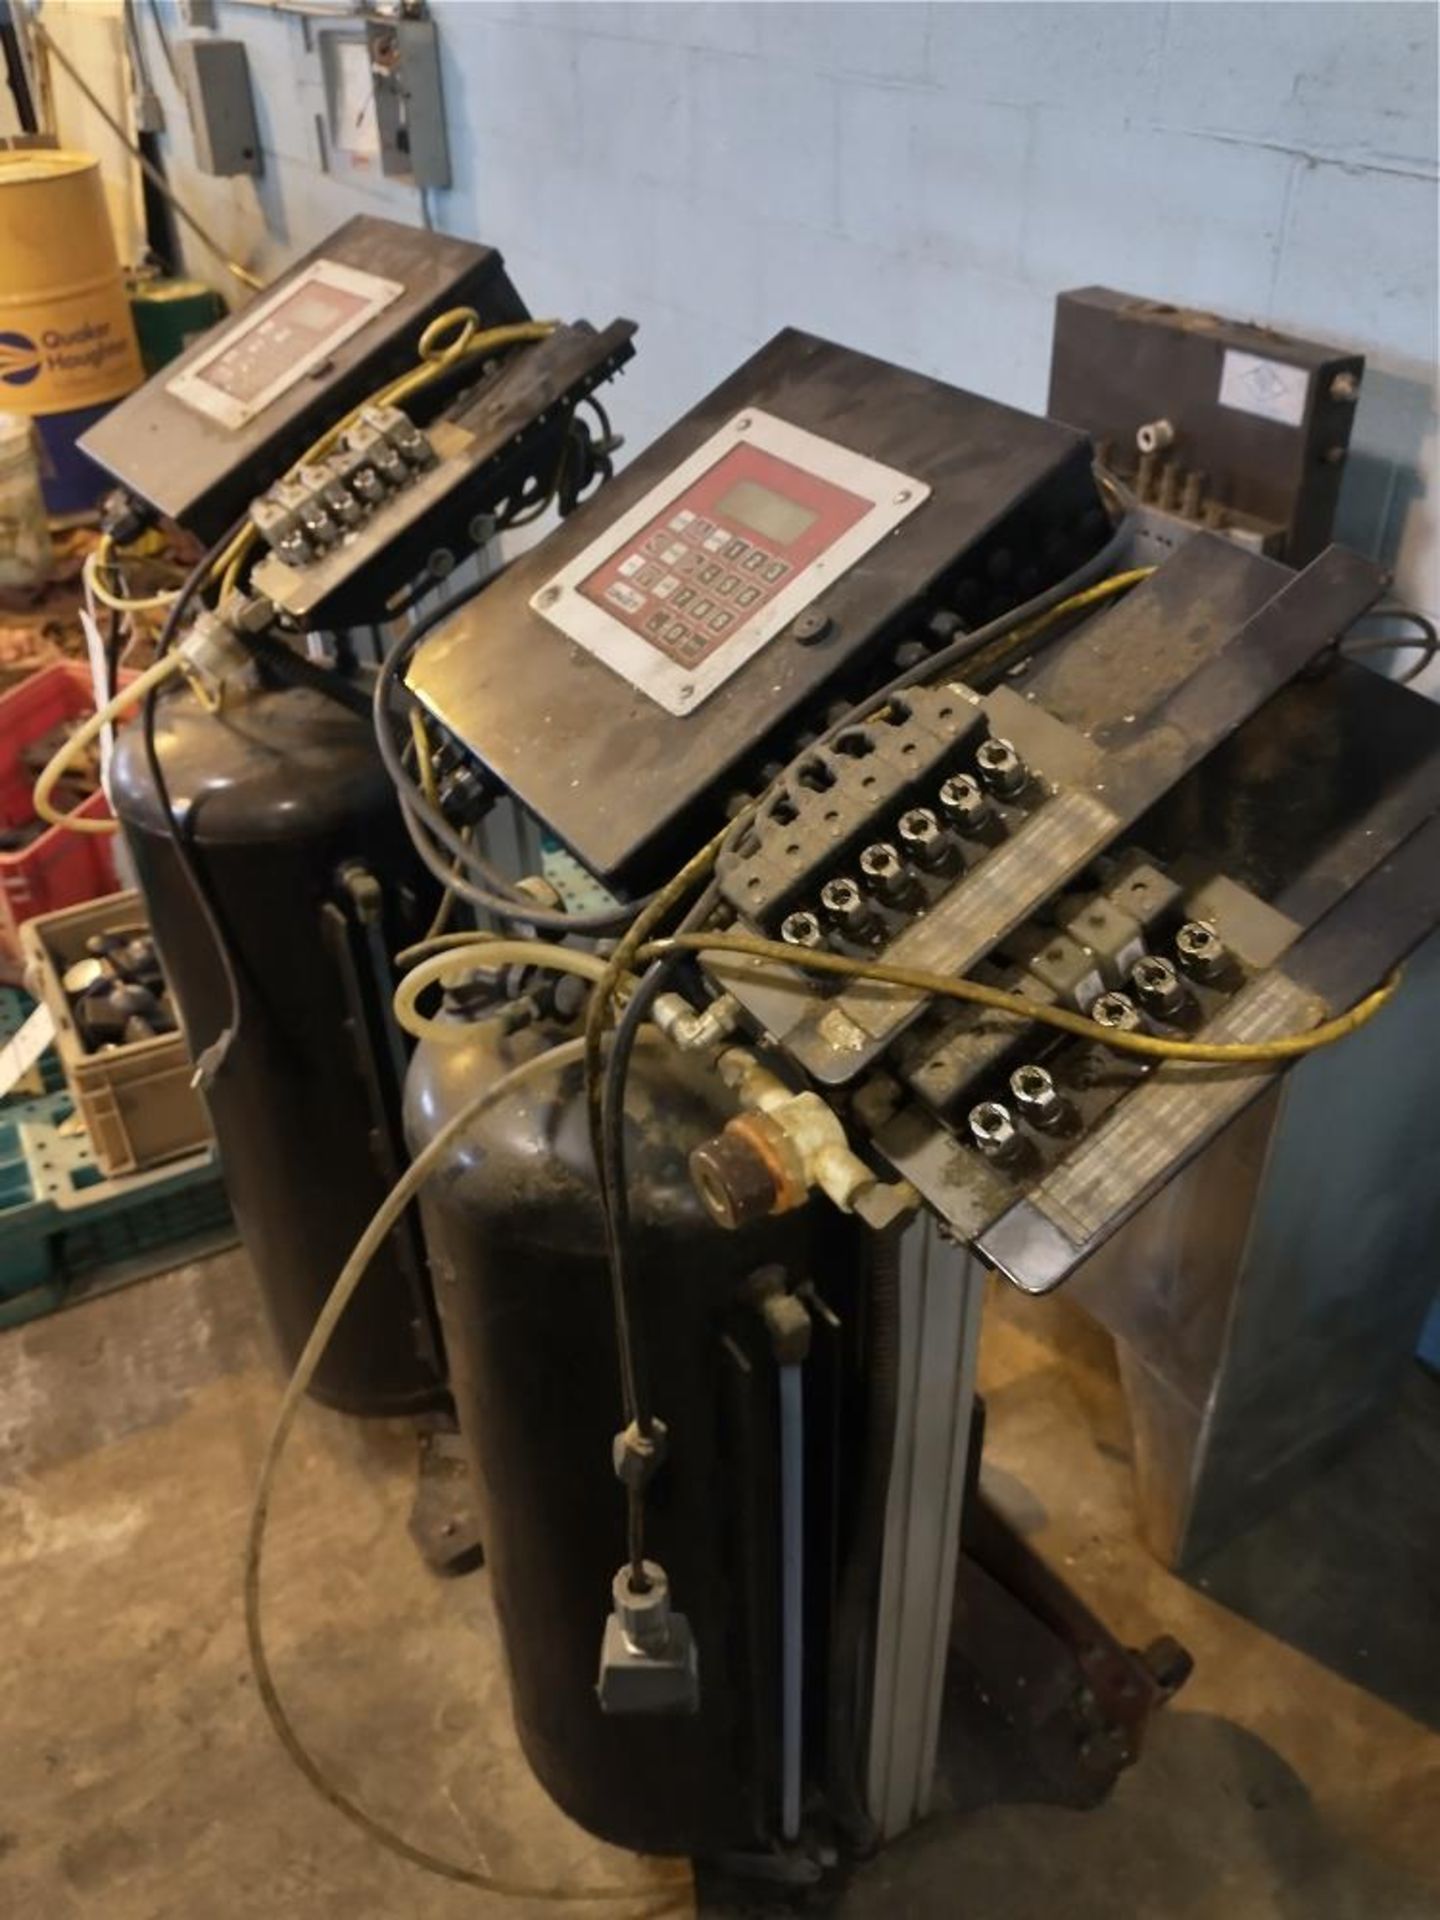 LOT OF (2) UNIST PRESSURE CONTROL UNITS AND (1) PAX LAB SYSTEM - Image 2 of 7